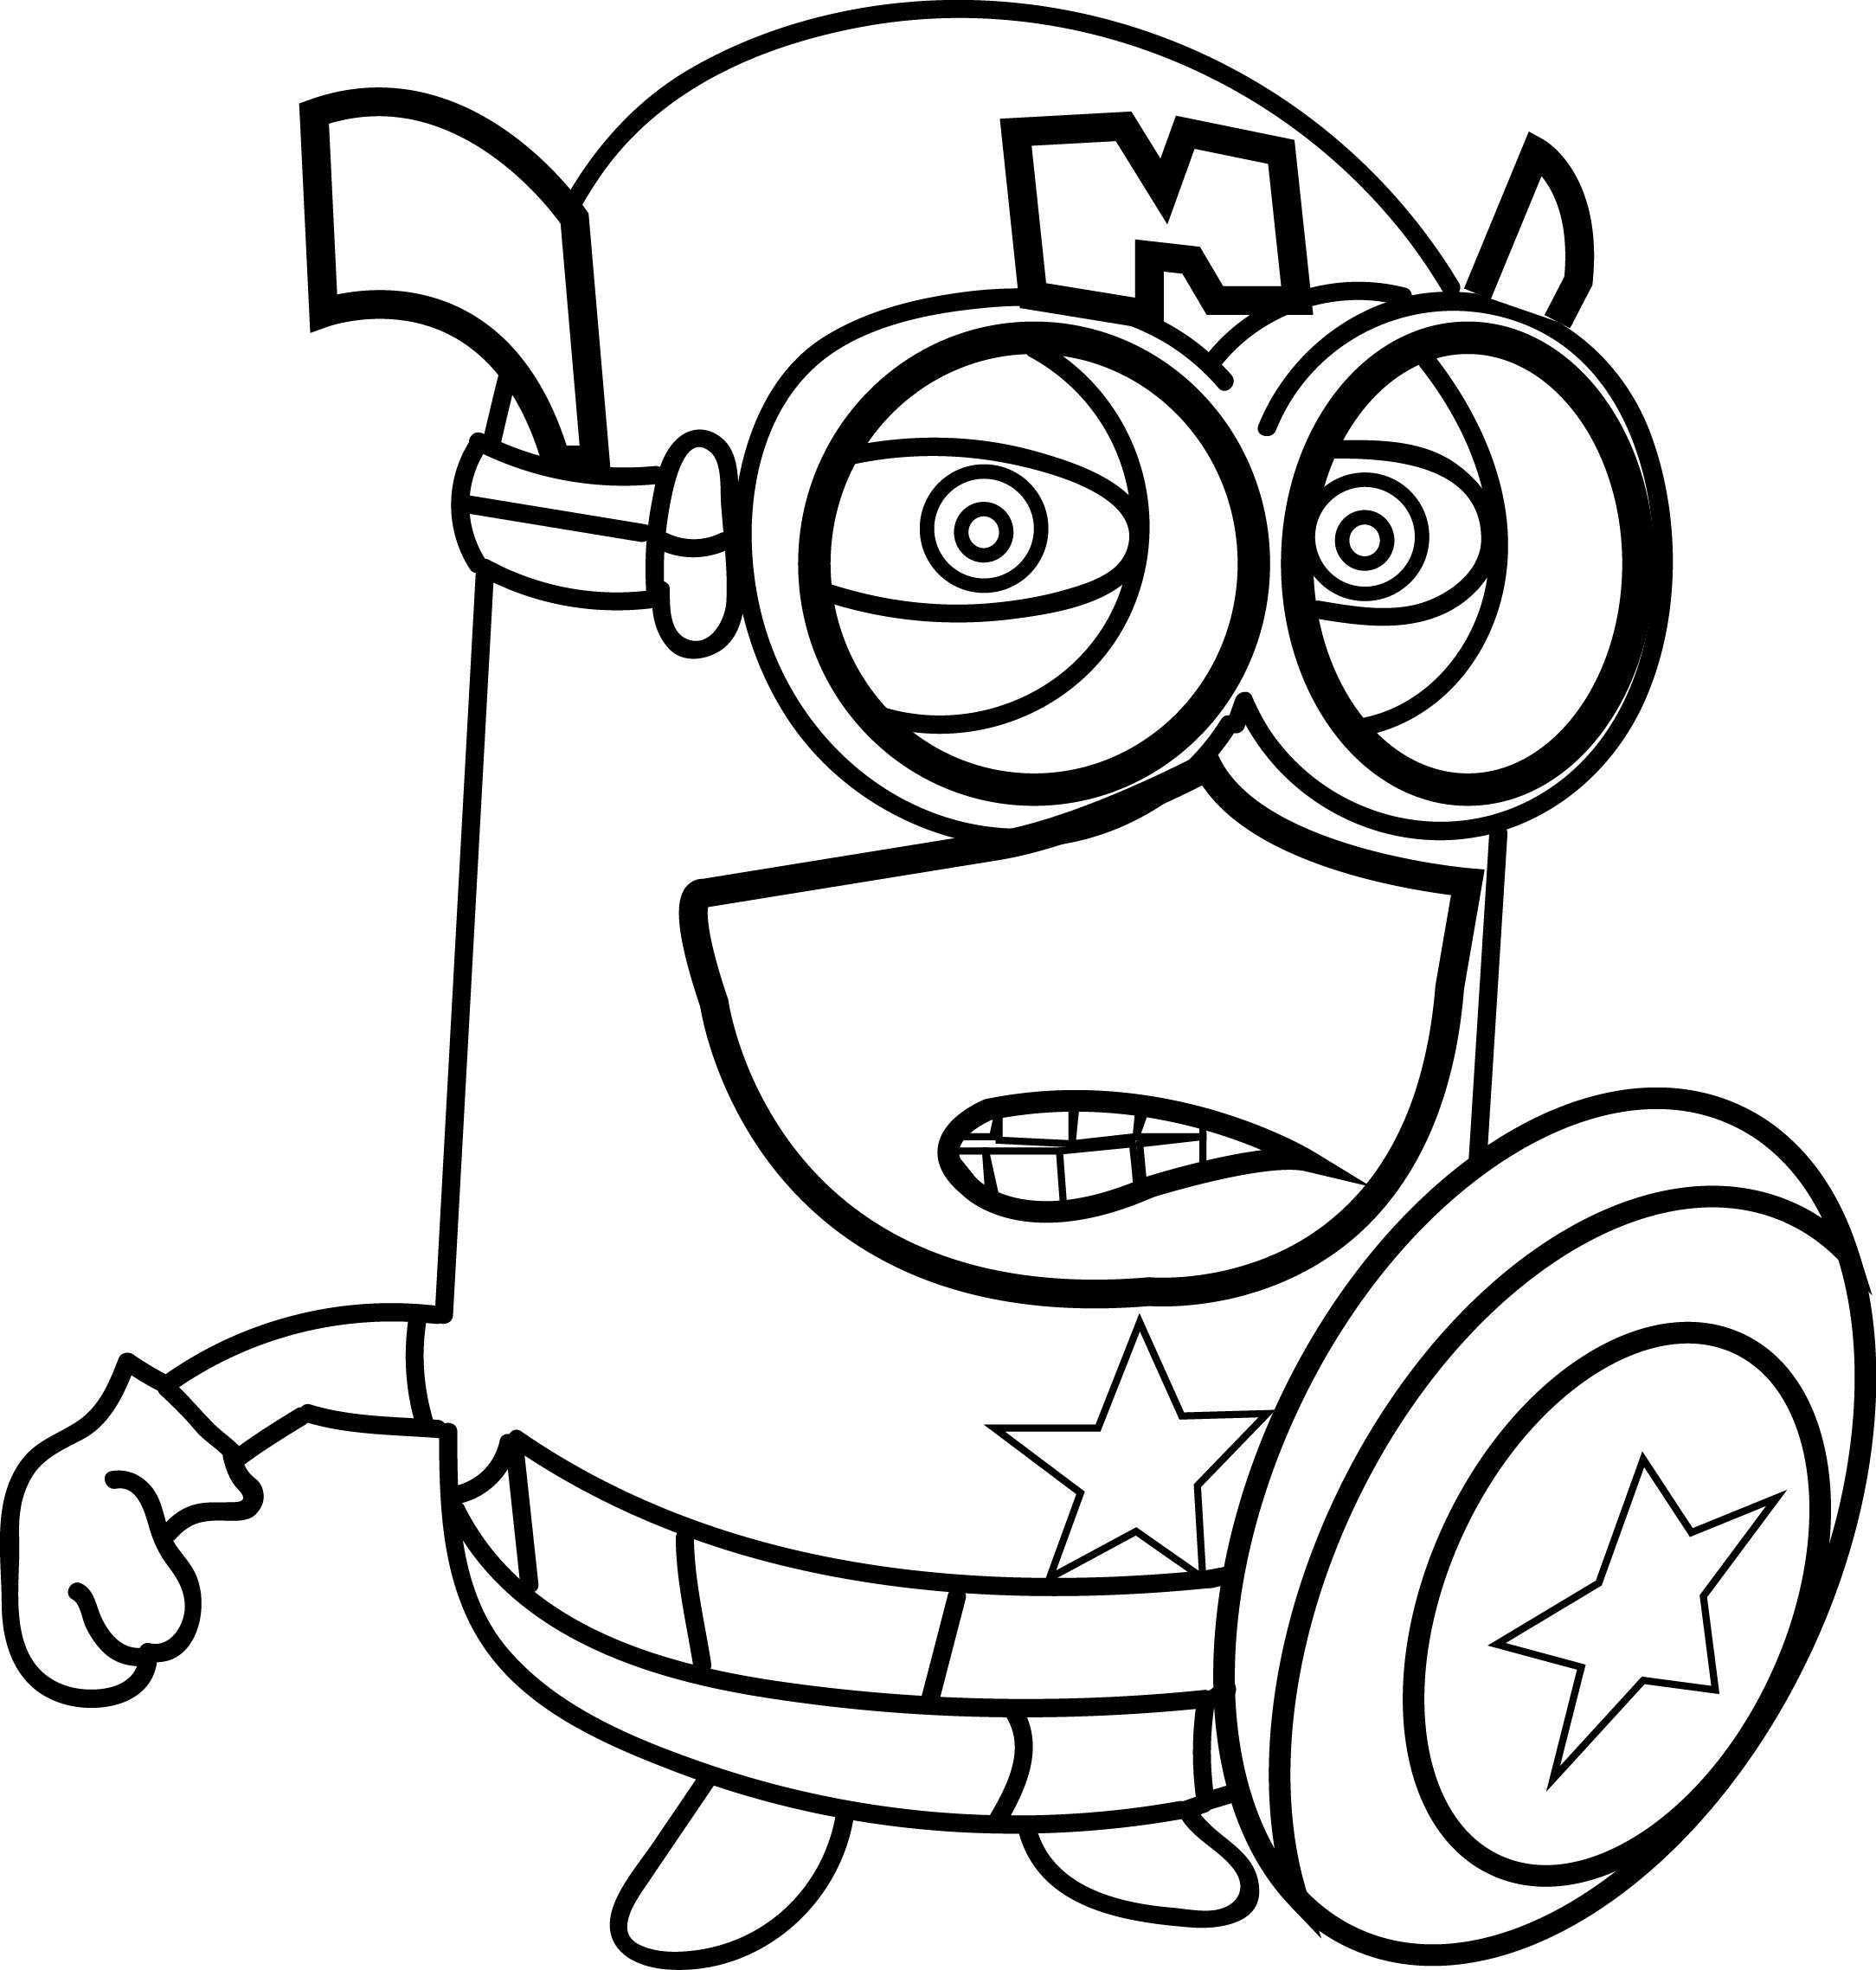 Captain America Minion Coloring Page   Free Printable ...